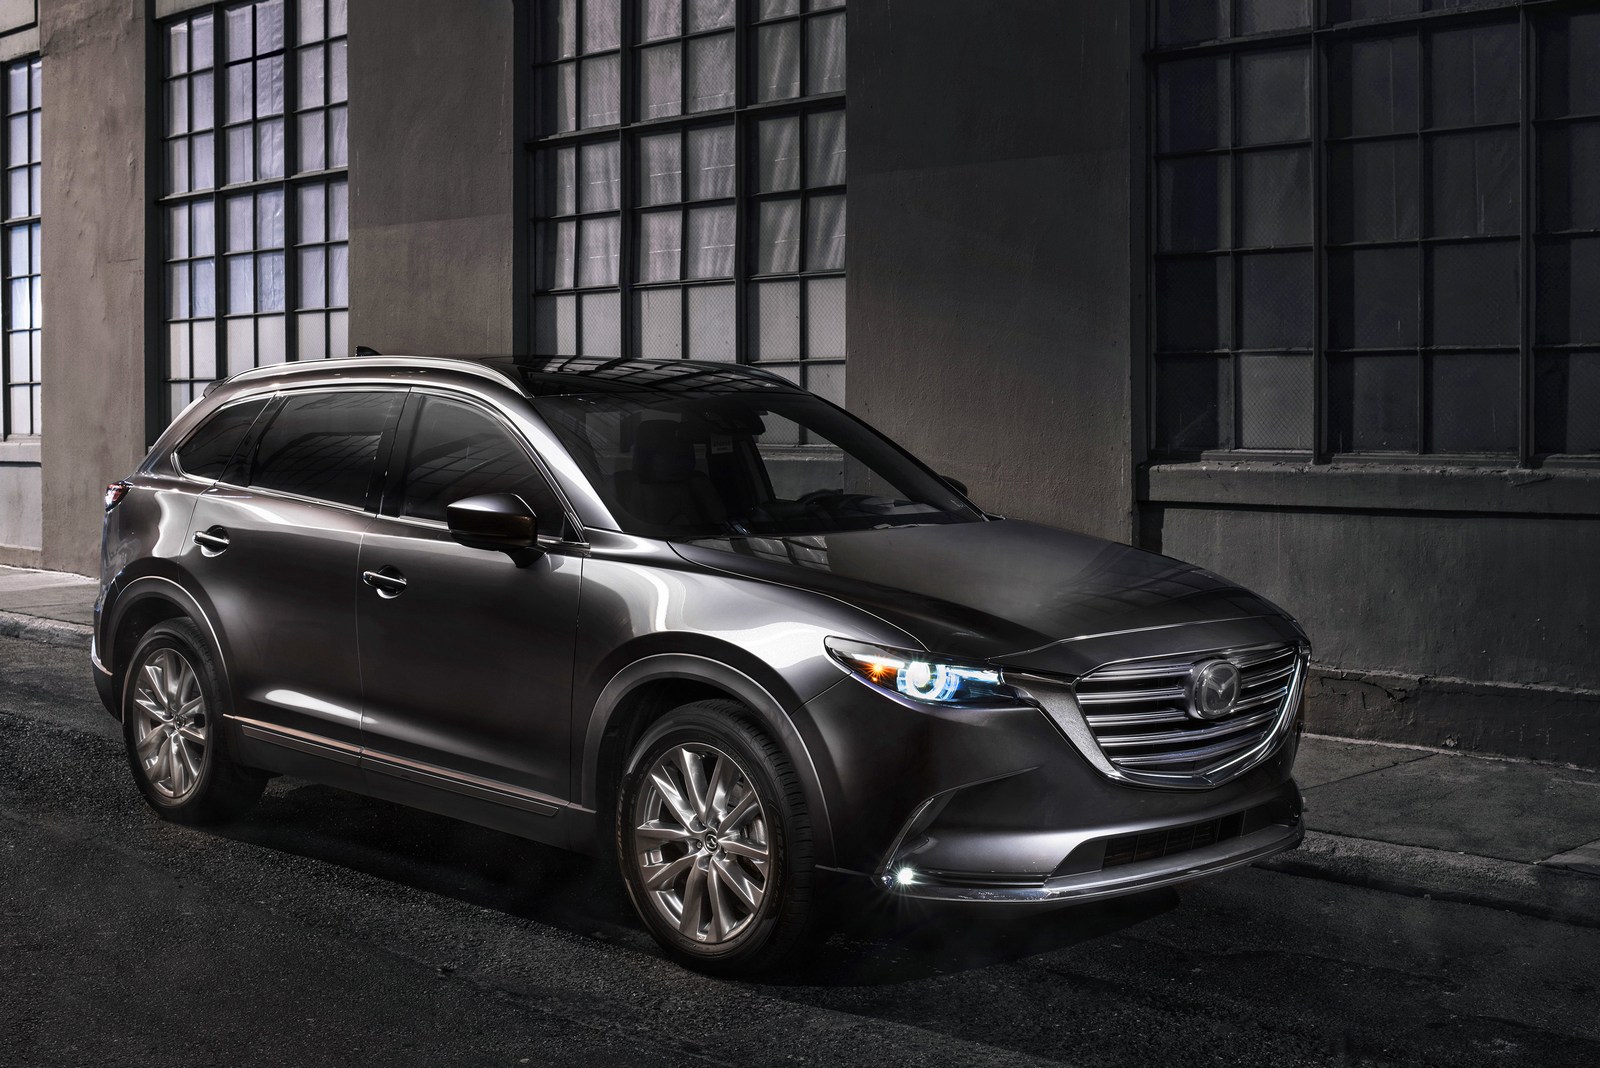 2016 Mazda Cx 9 Officially Revealed In La Debuts With